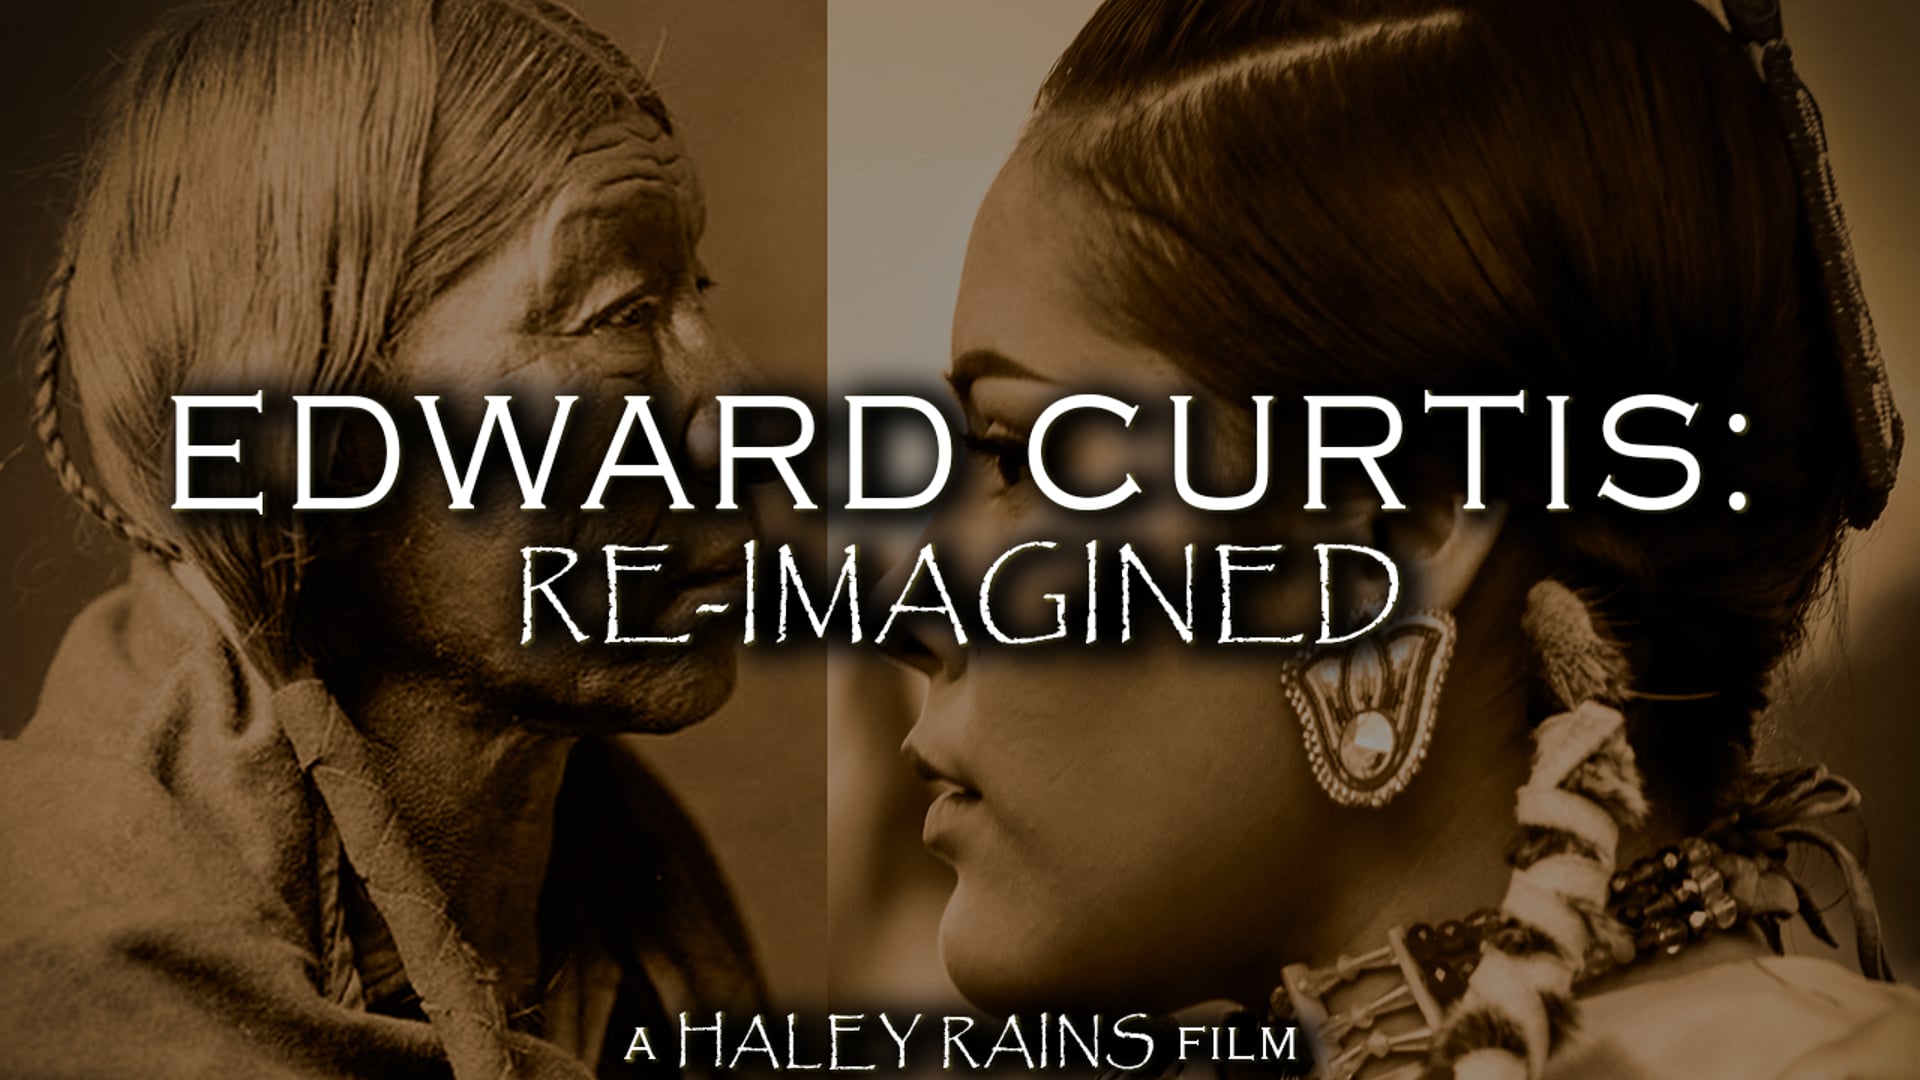 Edward Curtis: Re-Imagined